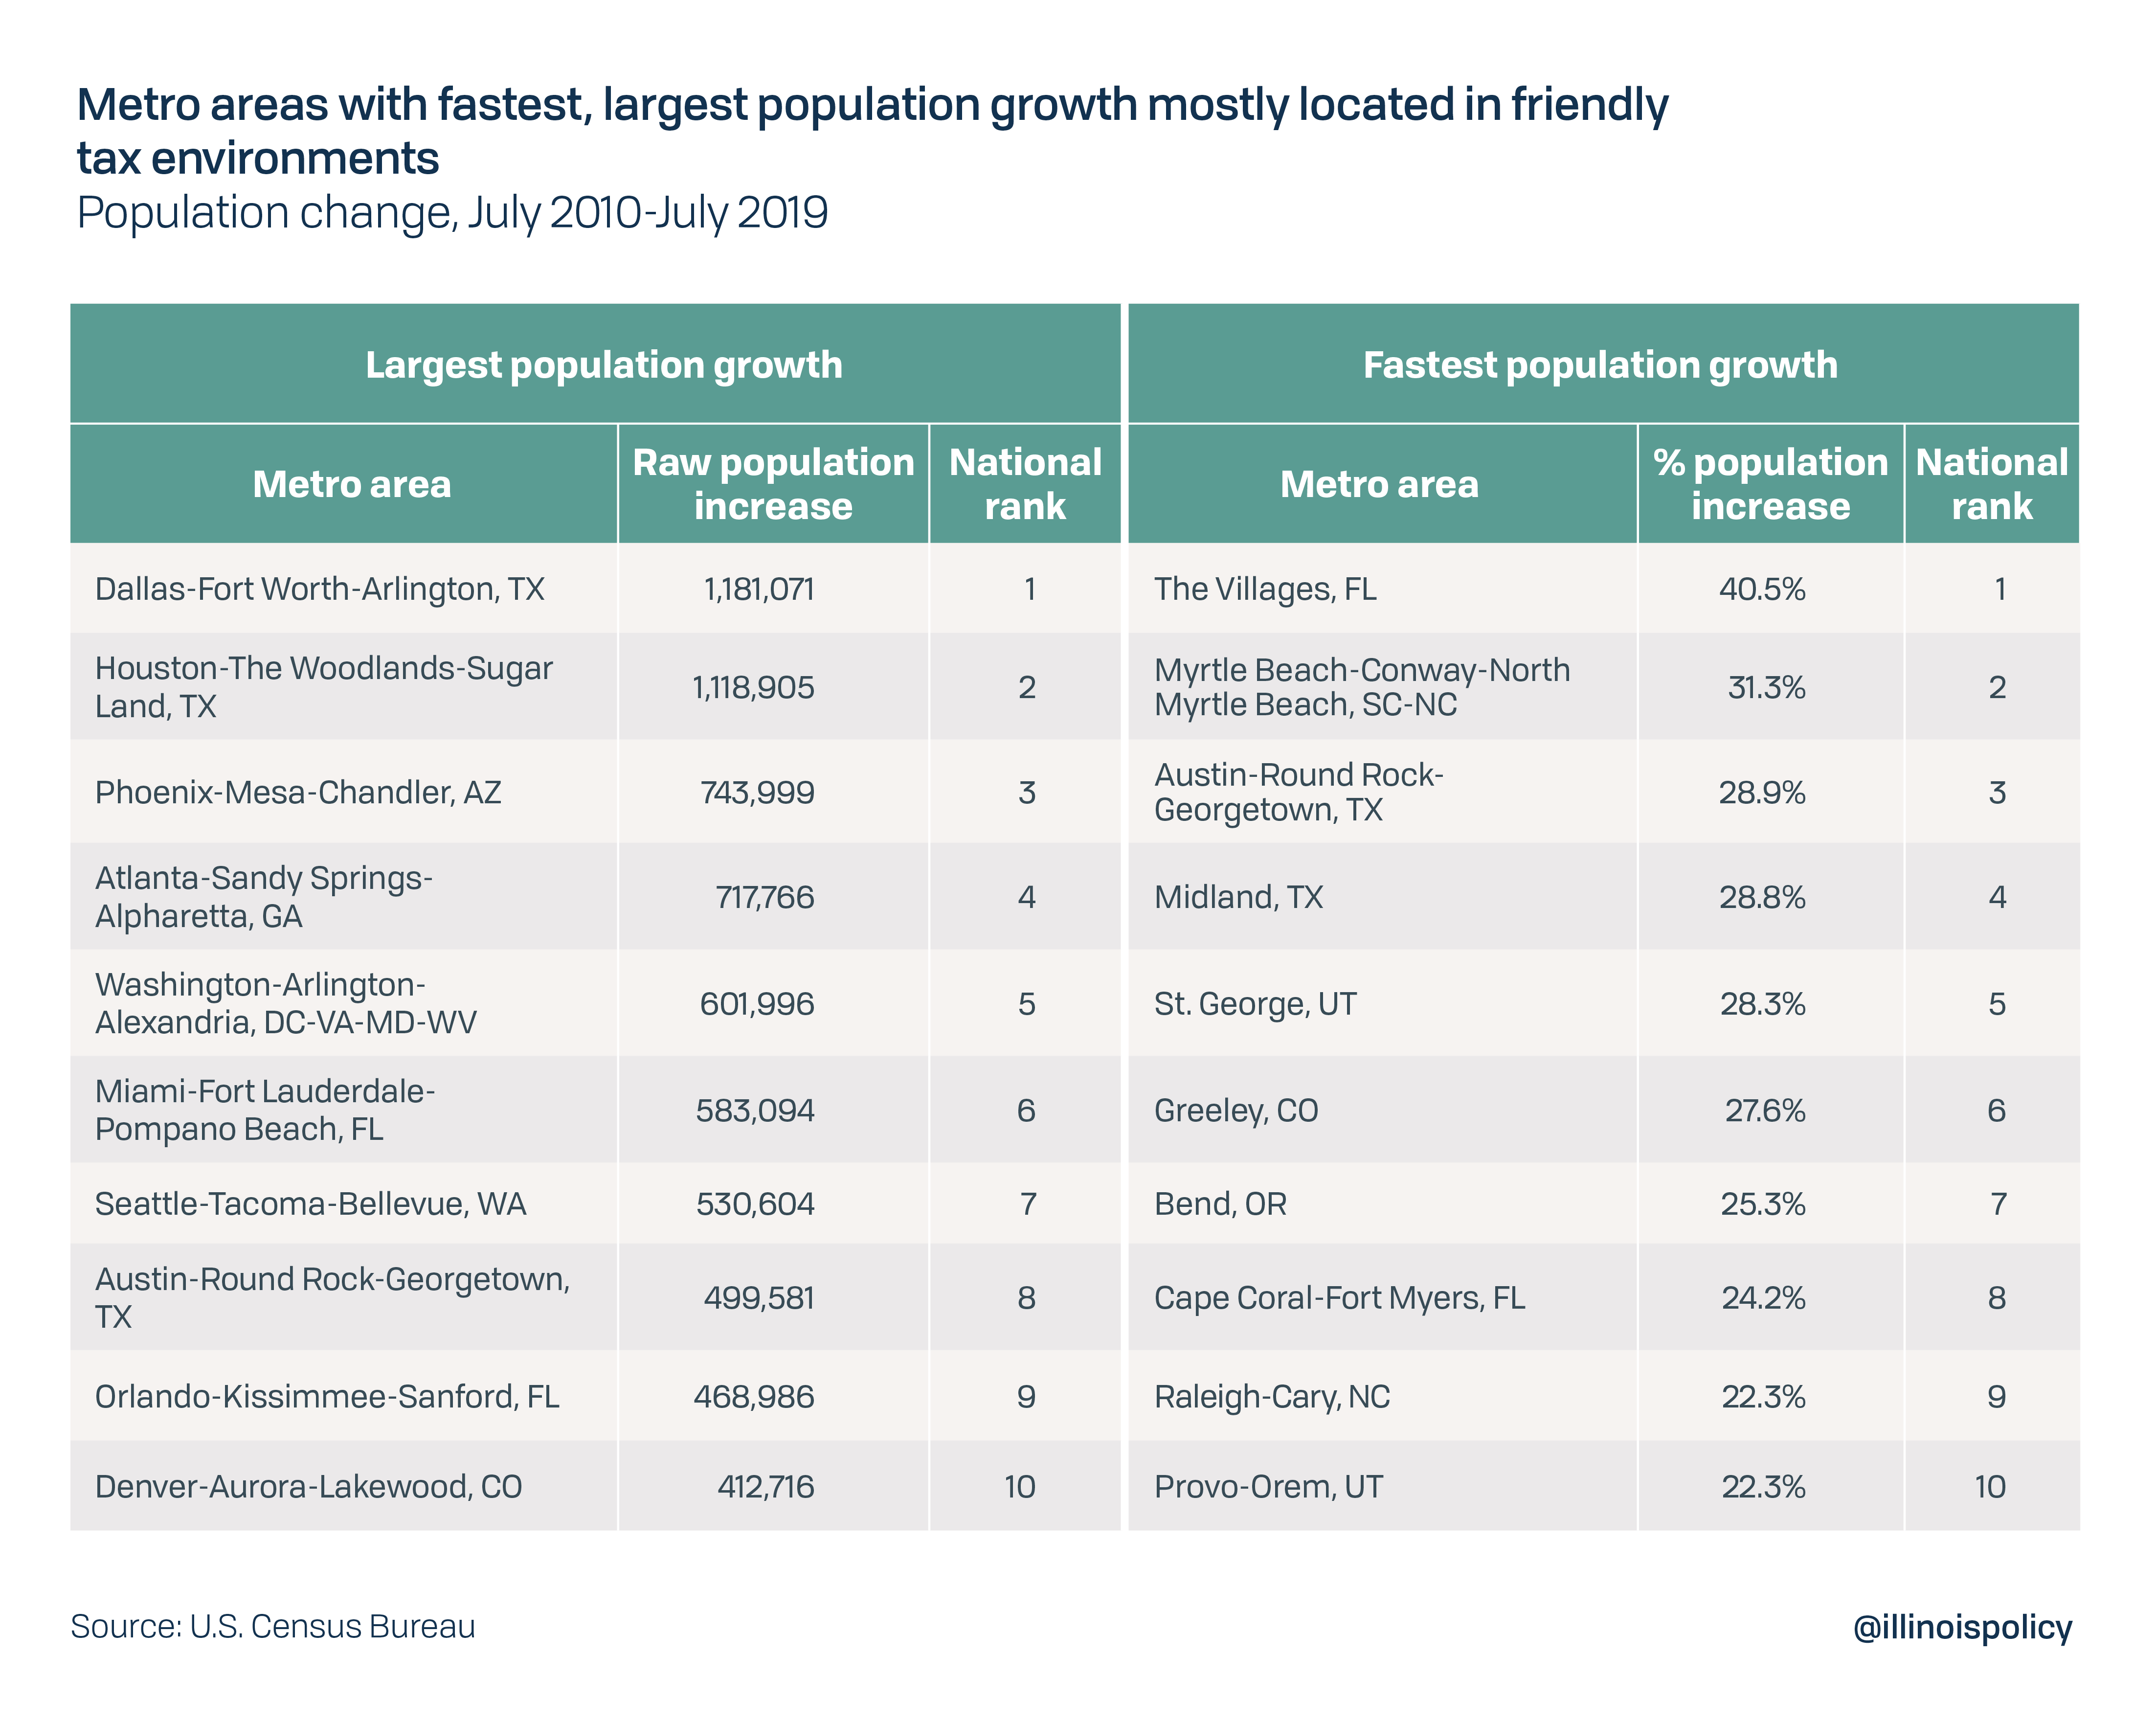 Metro areas with fastest, largest population growth mostly located in friendly tax environments